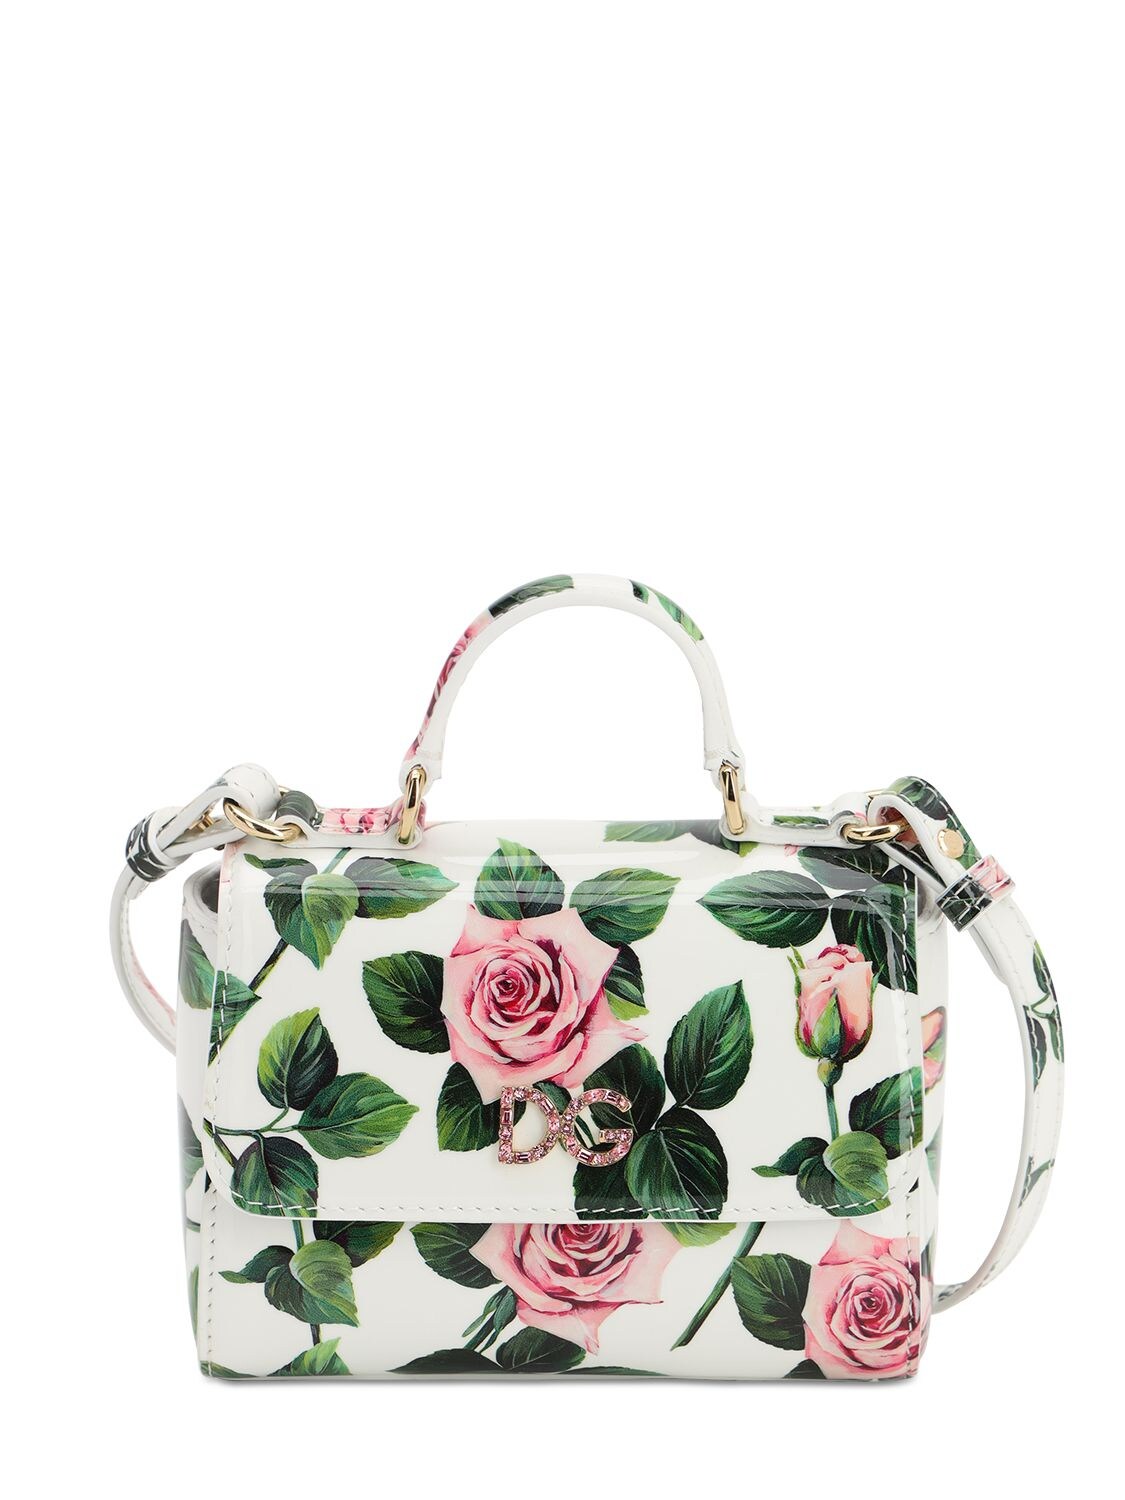 Dolce & Gabbana Rose Printed Patent Leather Shoulder Bag In White